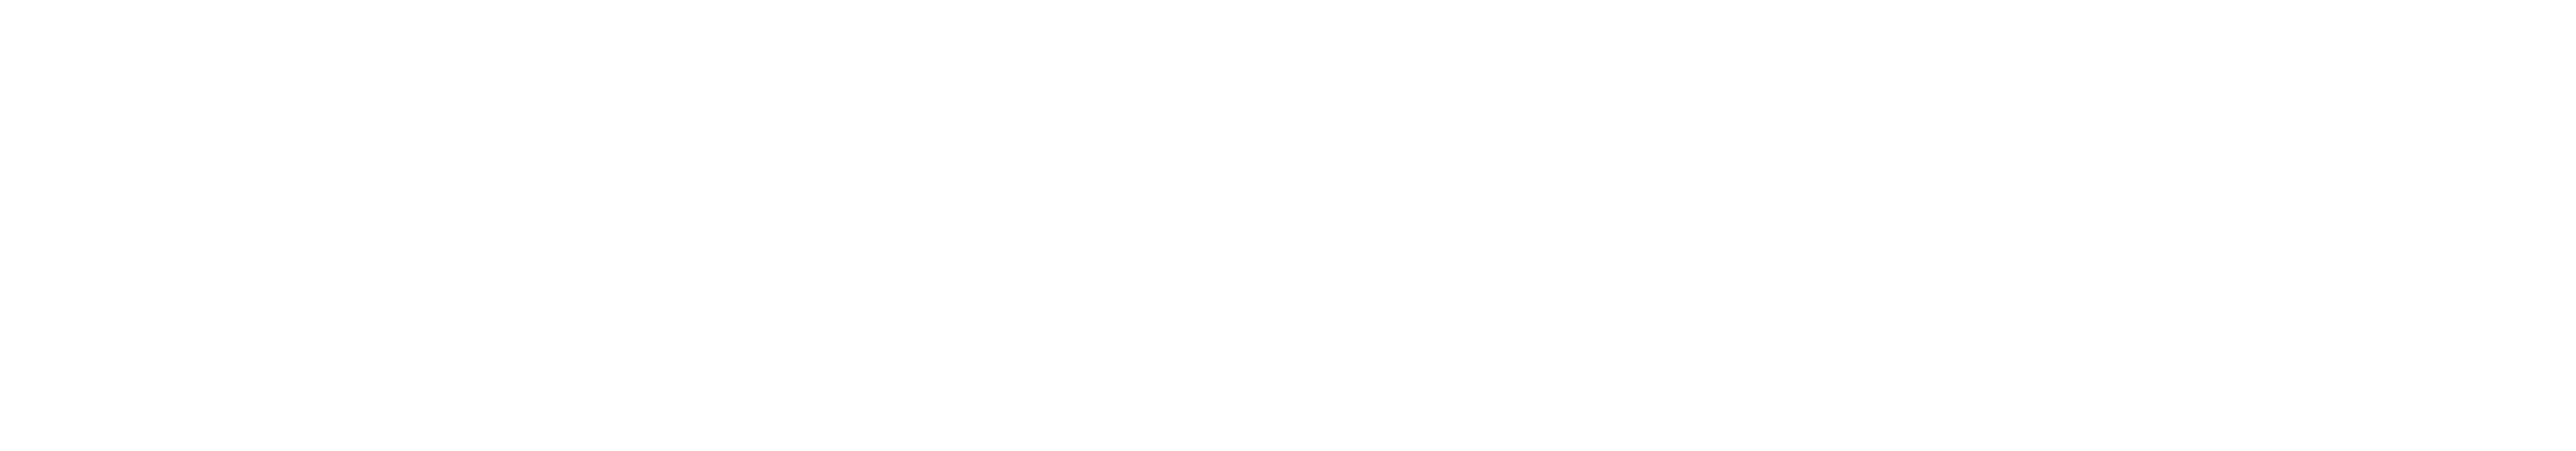 QuickMedical - Medical Equipment and Supplies